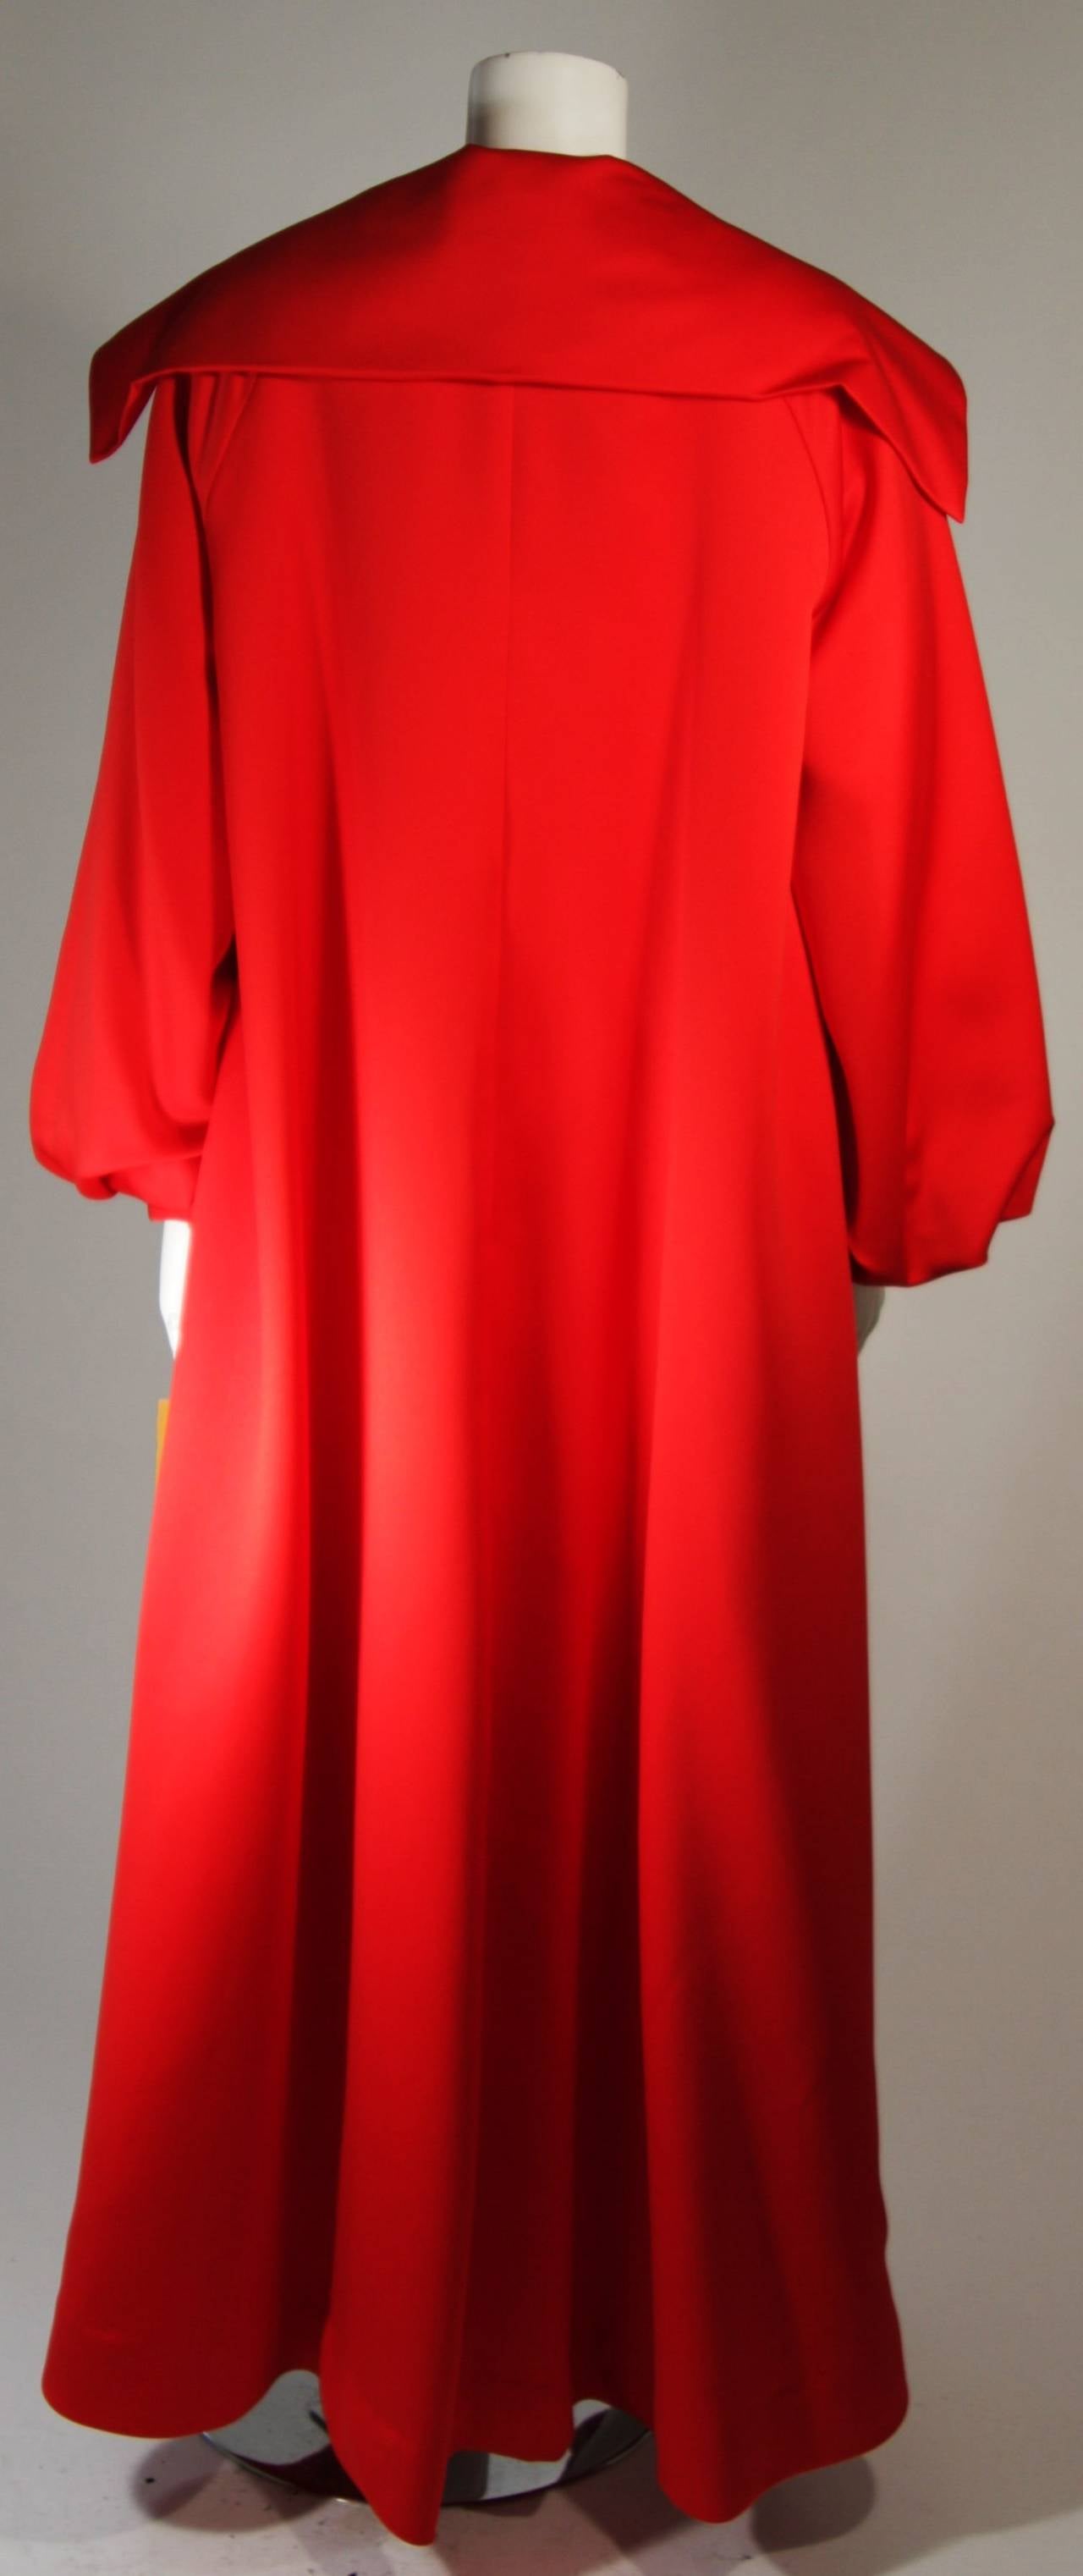 Victor Costa Striking Red Opera Coat Size Small 2